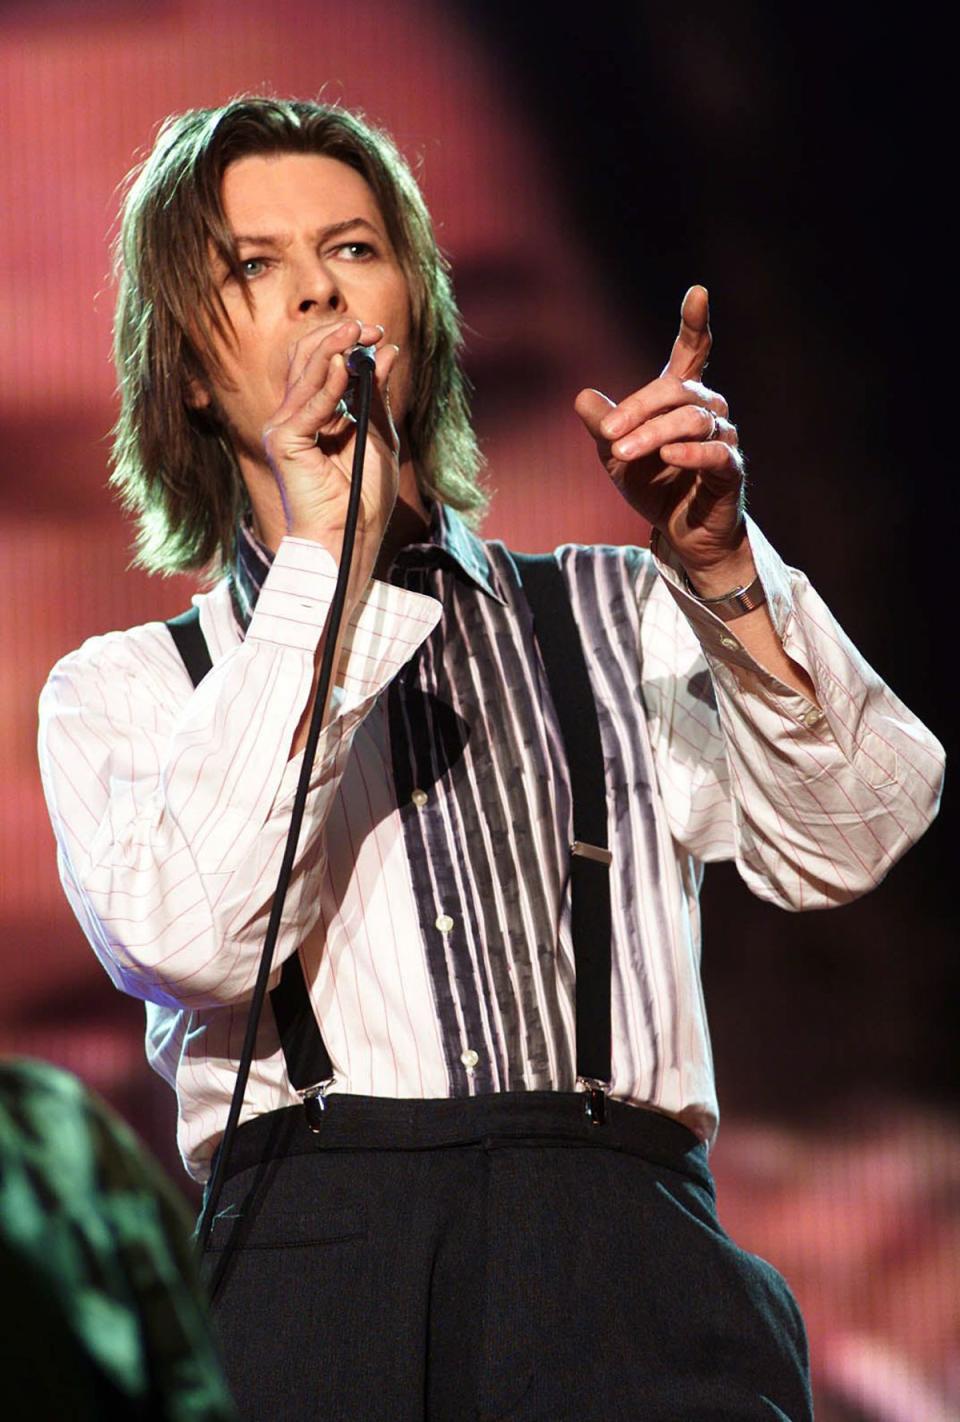 Wembley: David Bowie performing at Wembley Stadium in 1999 (Getty Images)